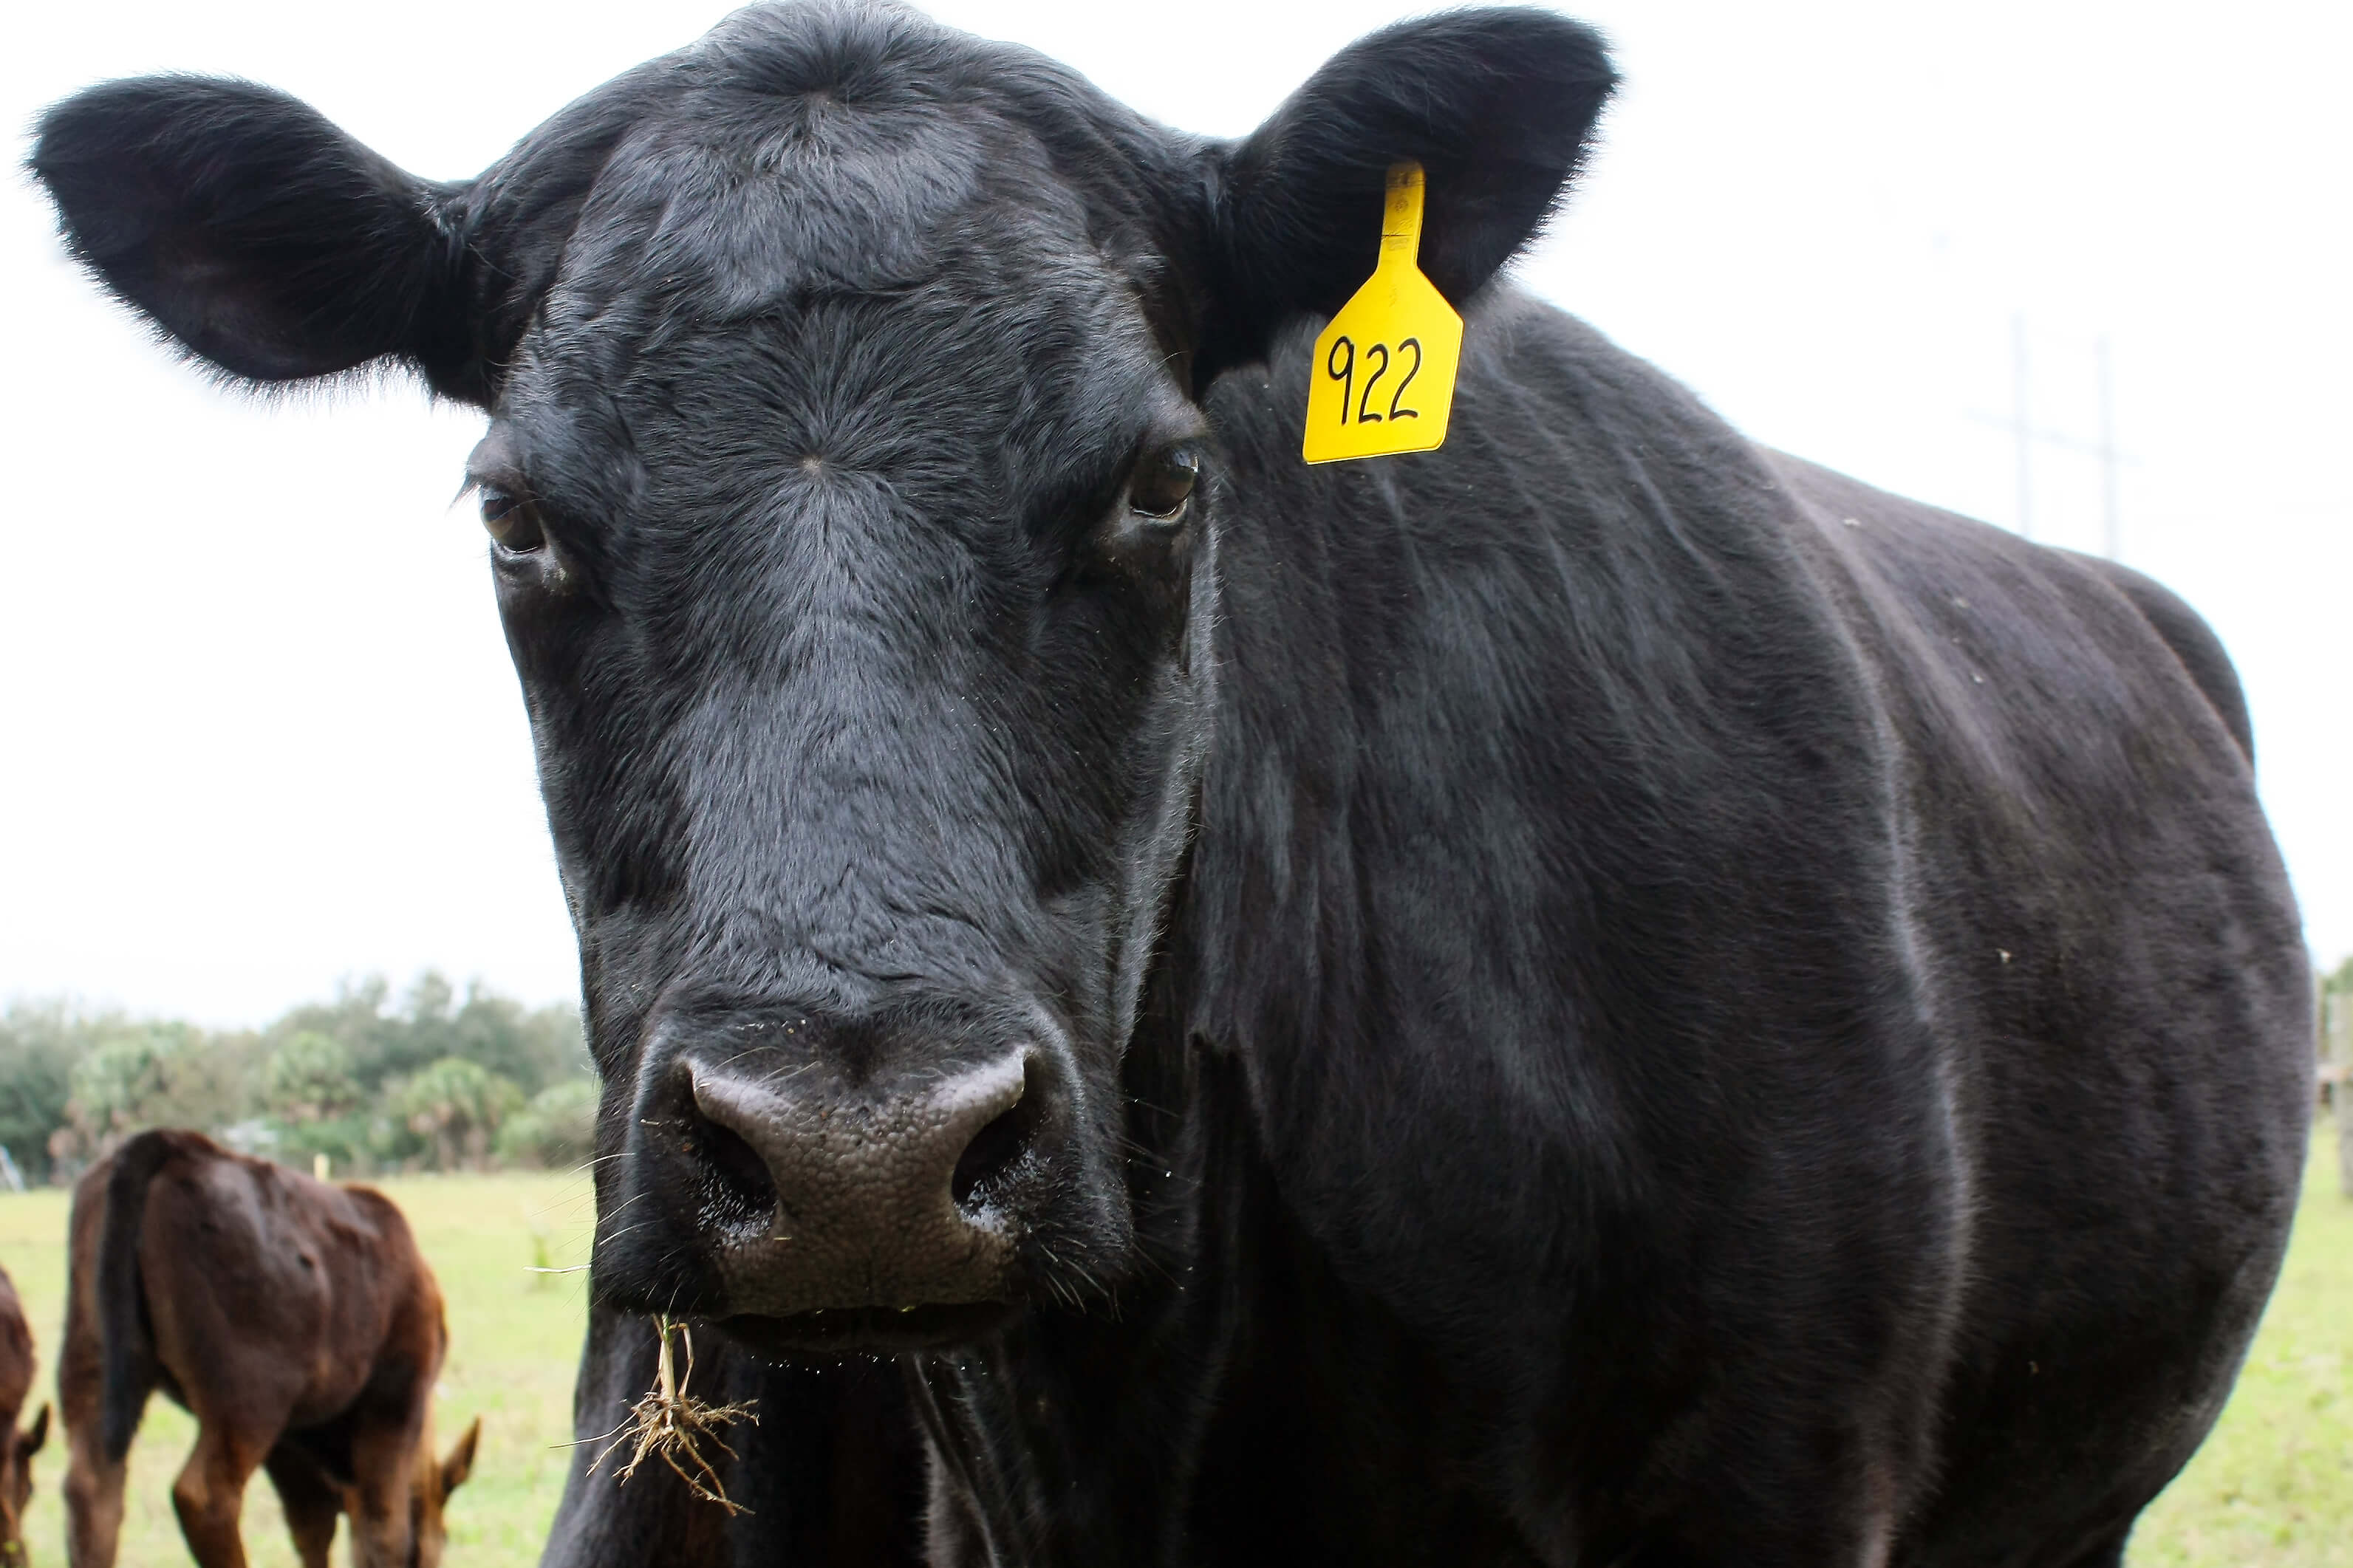 https://geneticliteracyproject.org/wp-content/uploads/2019/02/black-angus-cow.jpg